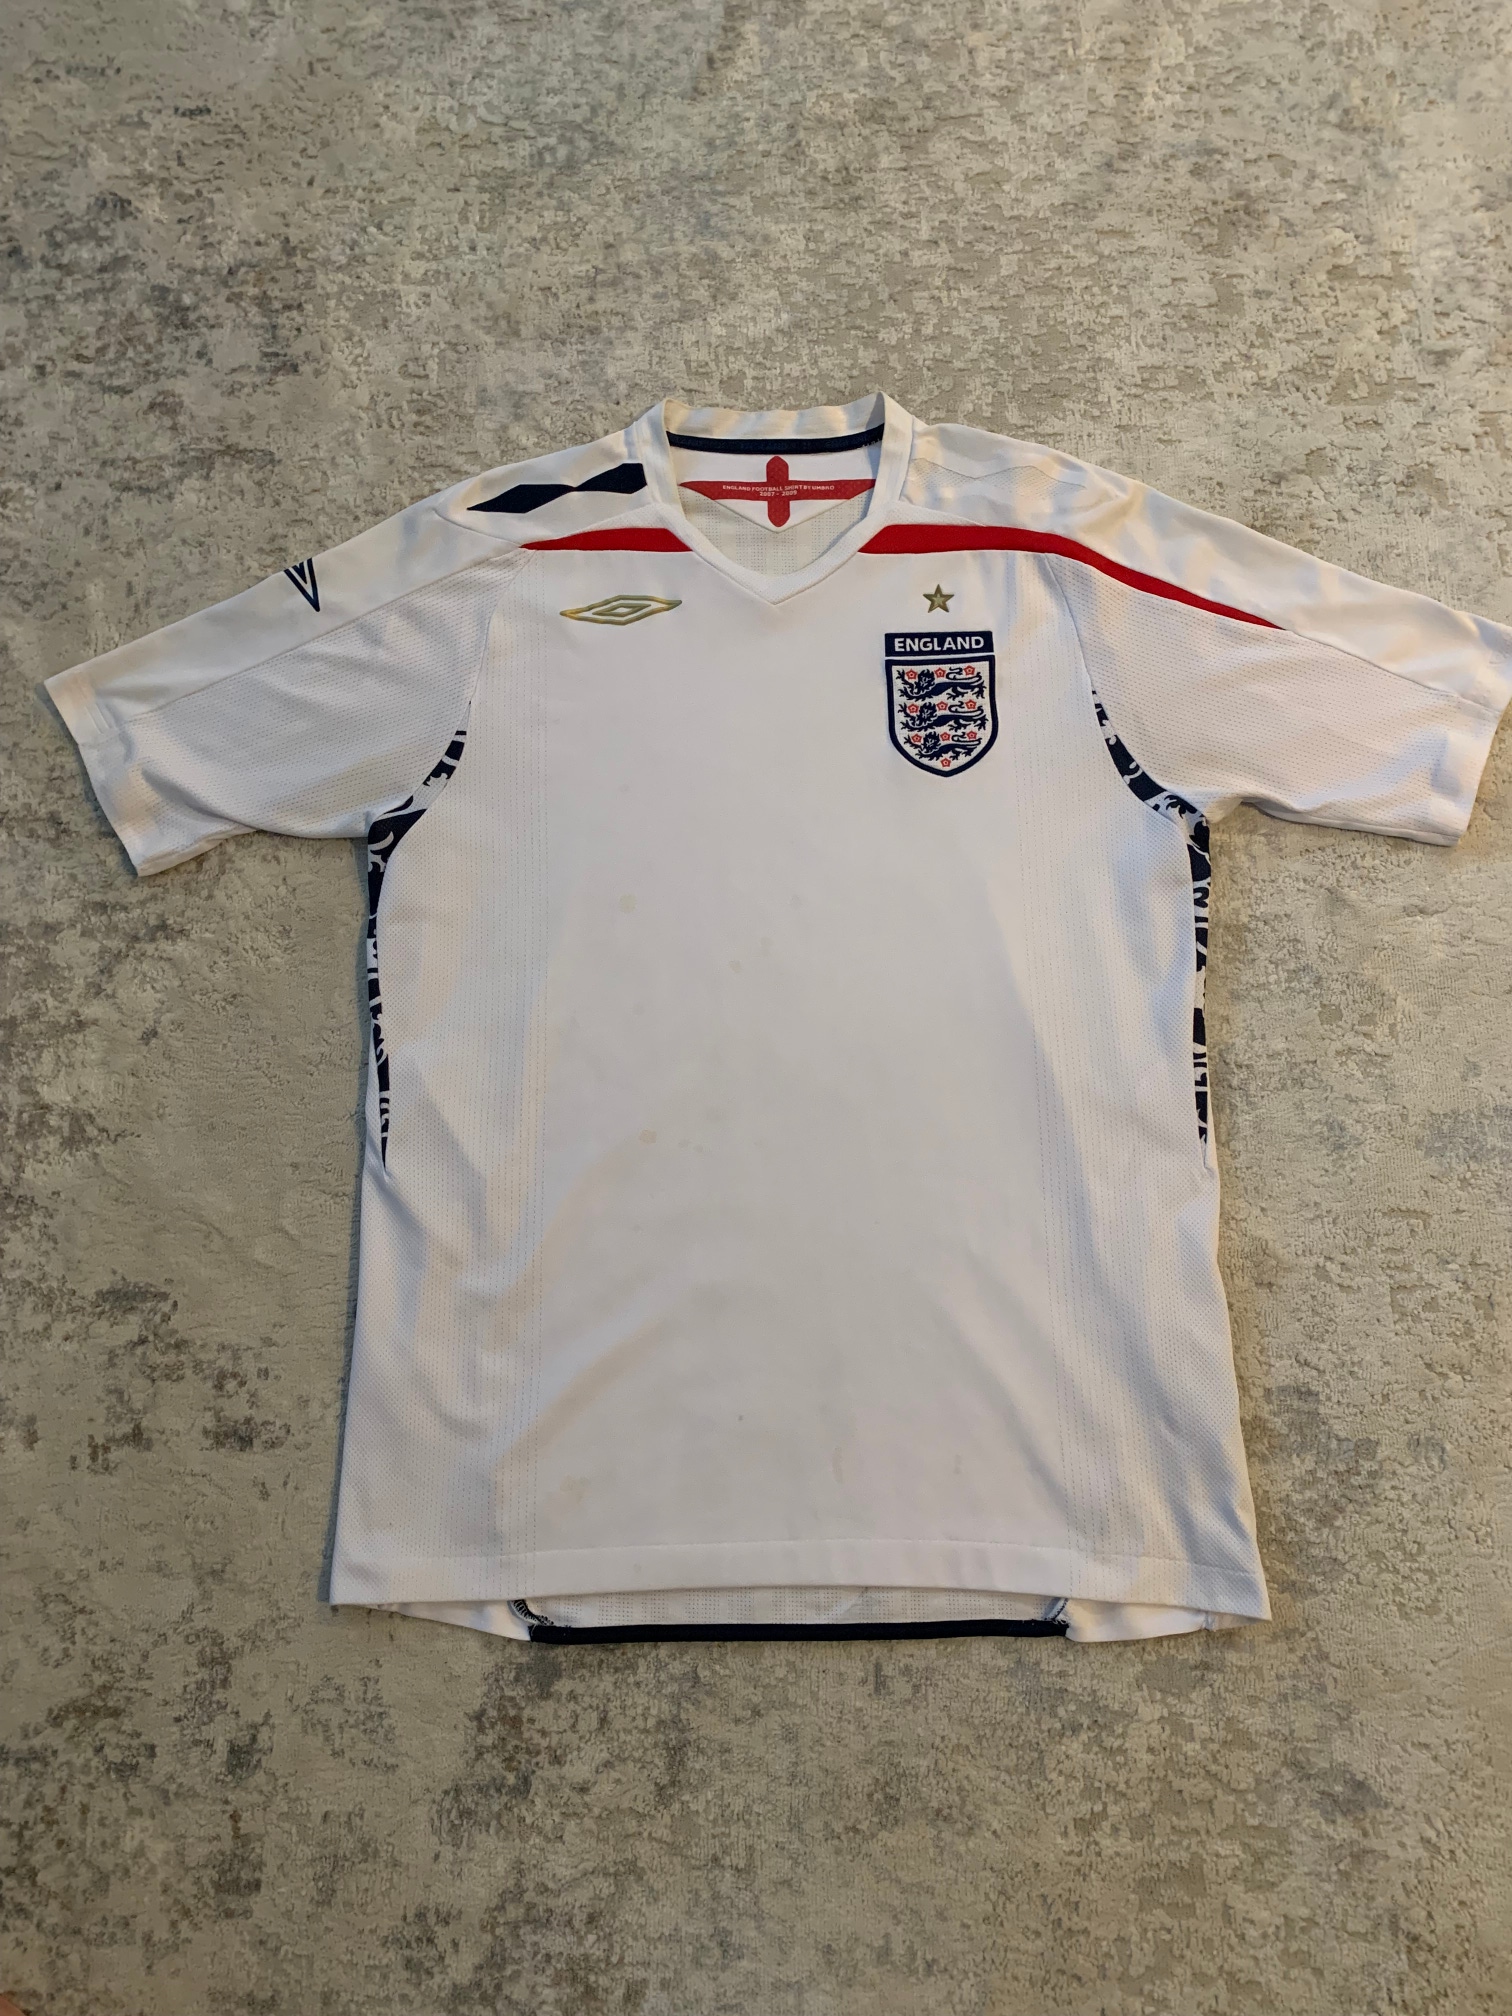 England 2007-2009 National Team Authentic Home Soccer Jersey - White Used Medium Men's Jersey